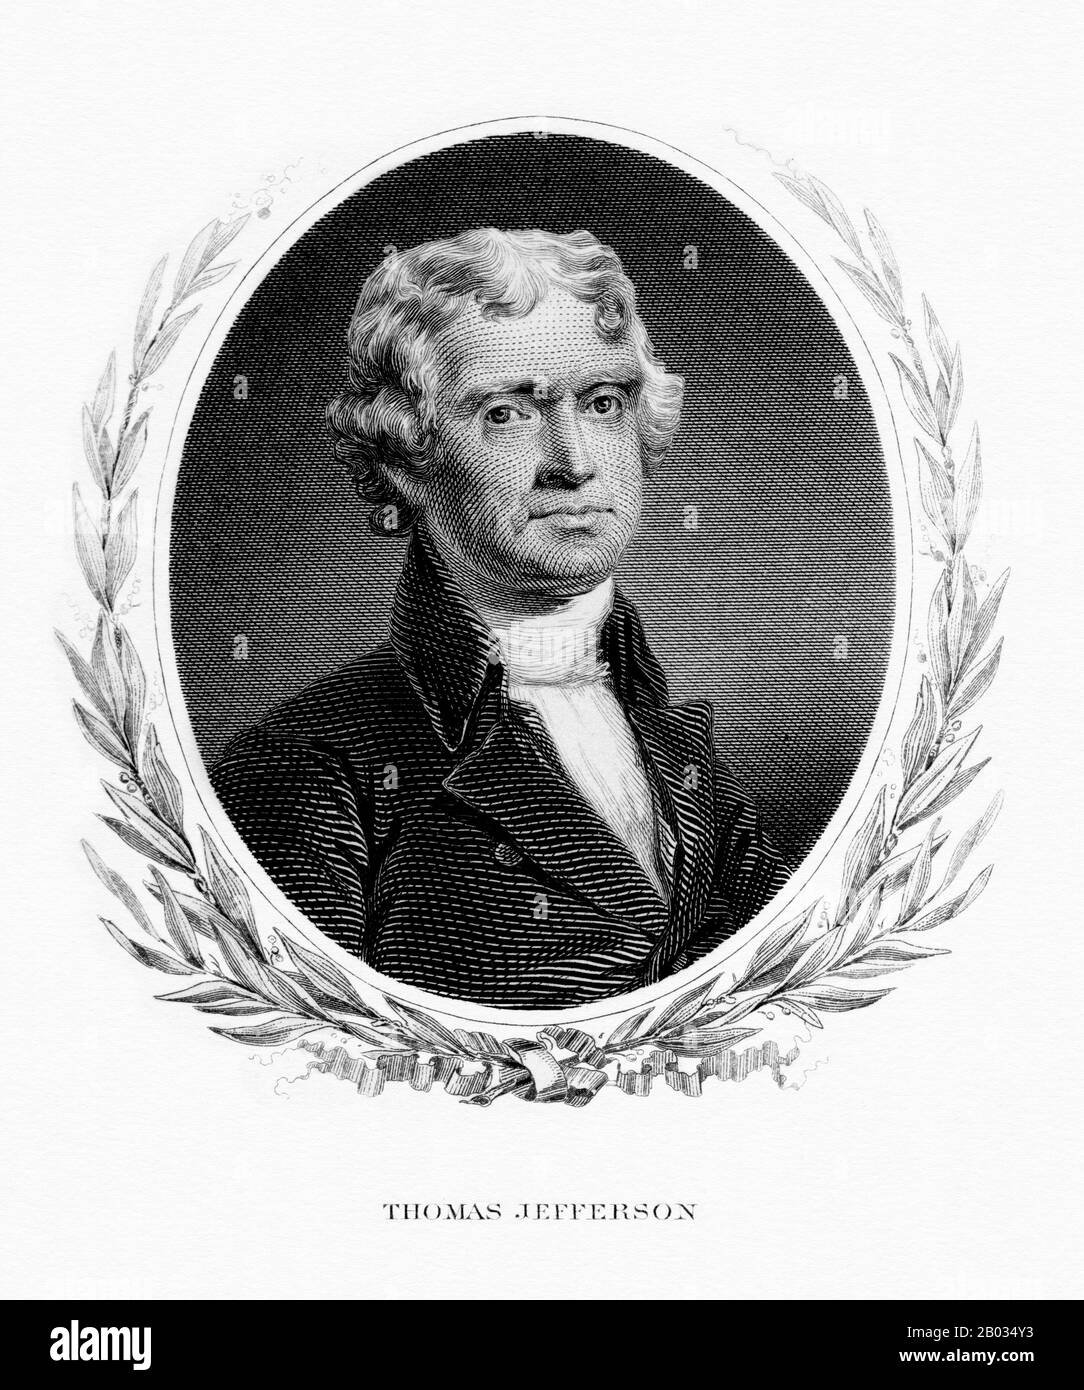 Thomas Jefferson (April 13, 1743 – July 4, 1826) was an American Founding Father and the principal author of the Declaration of Independence (1776). He was elected the second Vice President of the United States (1797–1801), serving under John Adams and in 1800 was elected the third President (1801–09).  Jefferson was a proponent of democracy, republicanism, and individual rights, which motivated American colonists to break from Great Britain and form a new nation. He produced formative documents and decisions at both the state and national level. Stock Photo